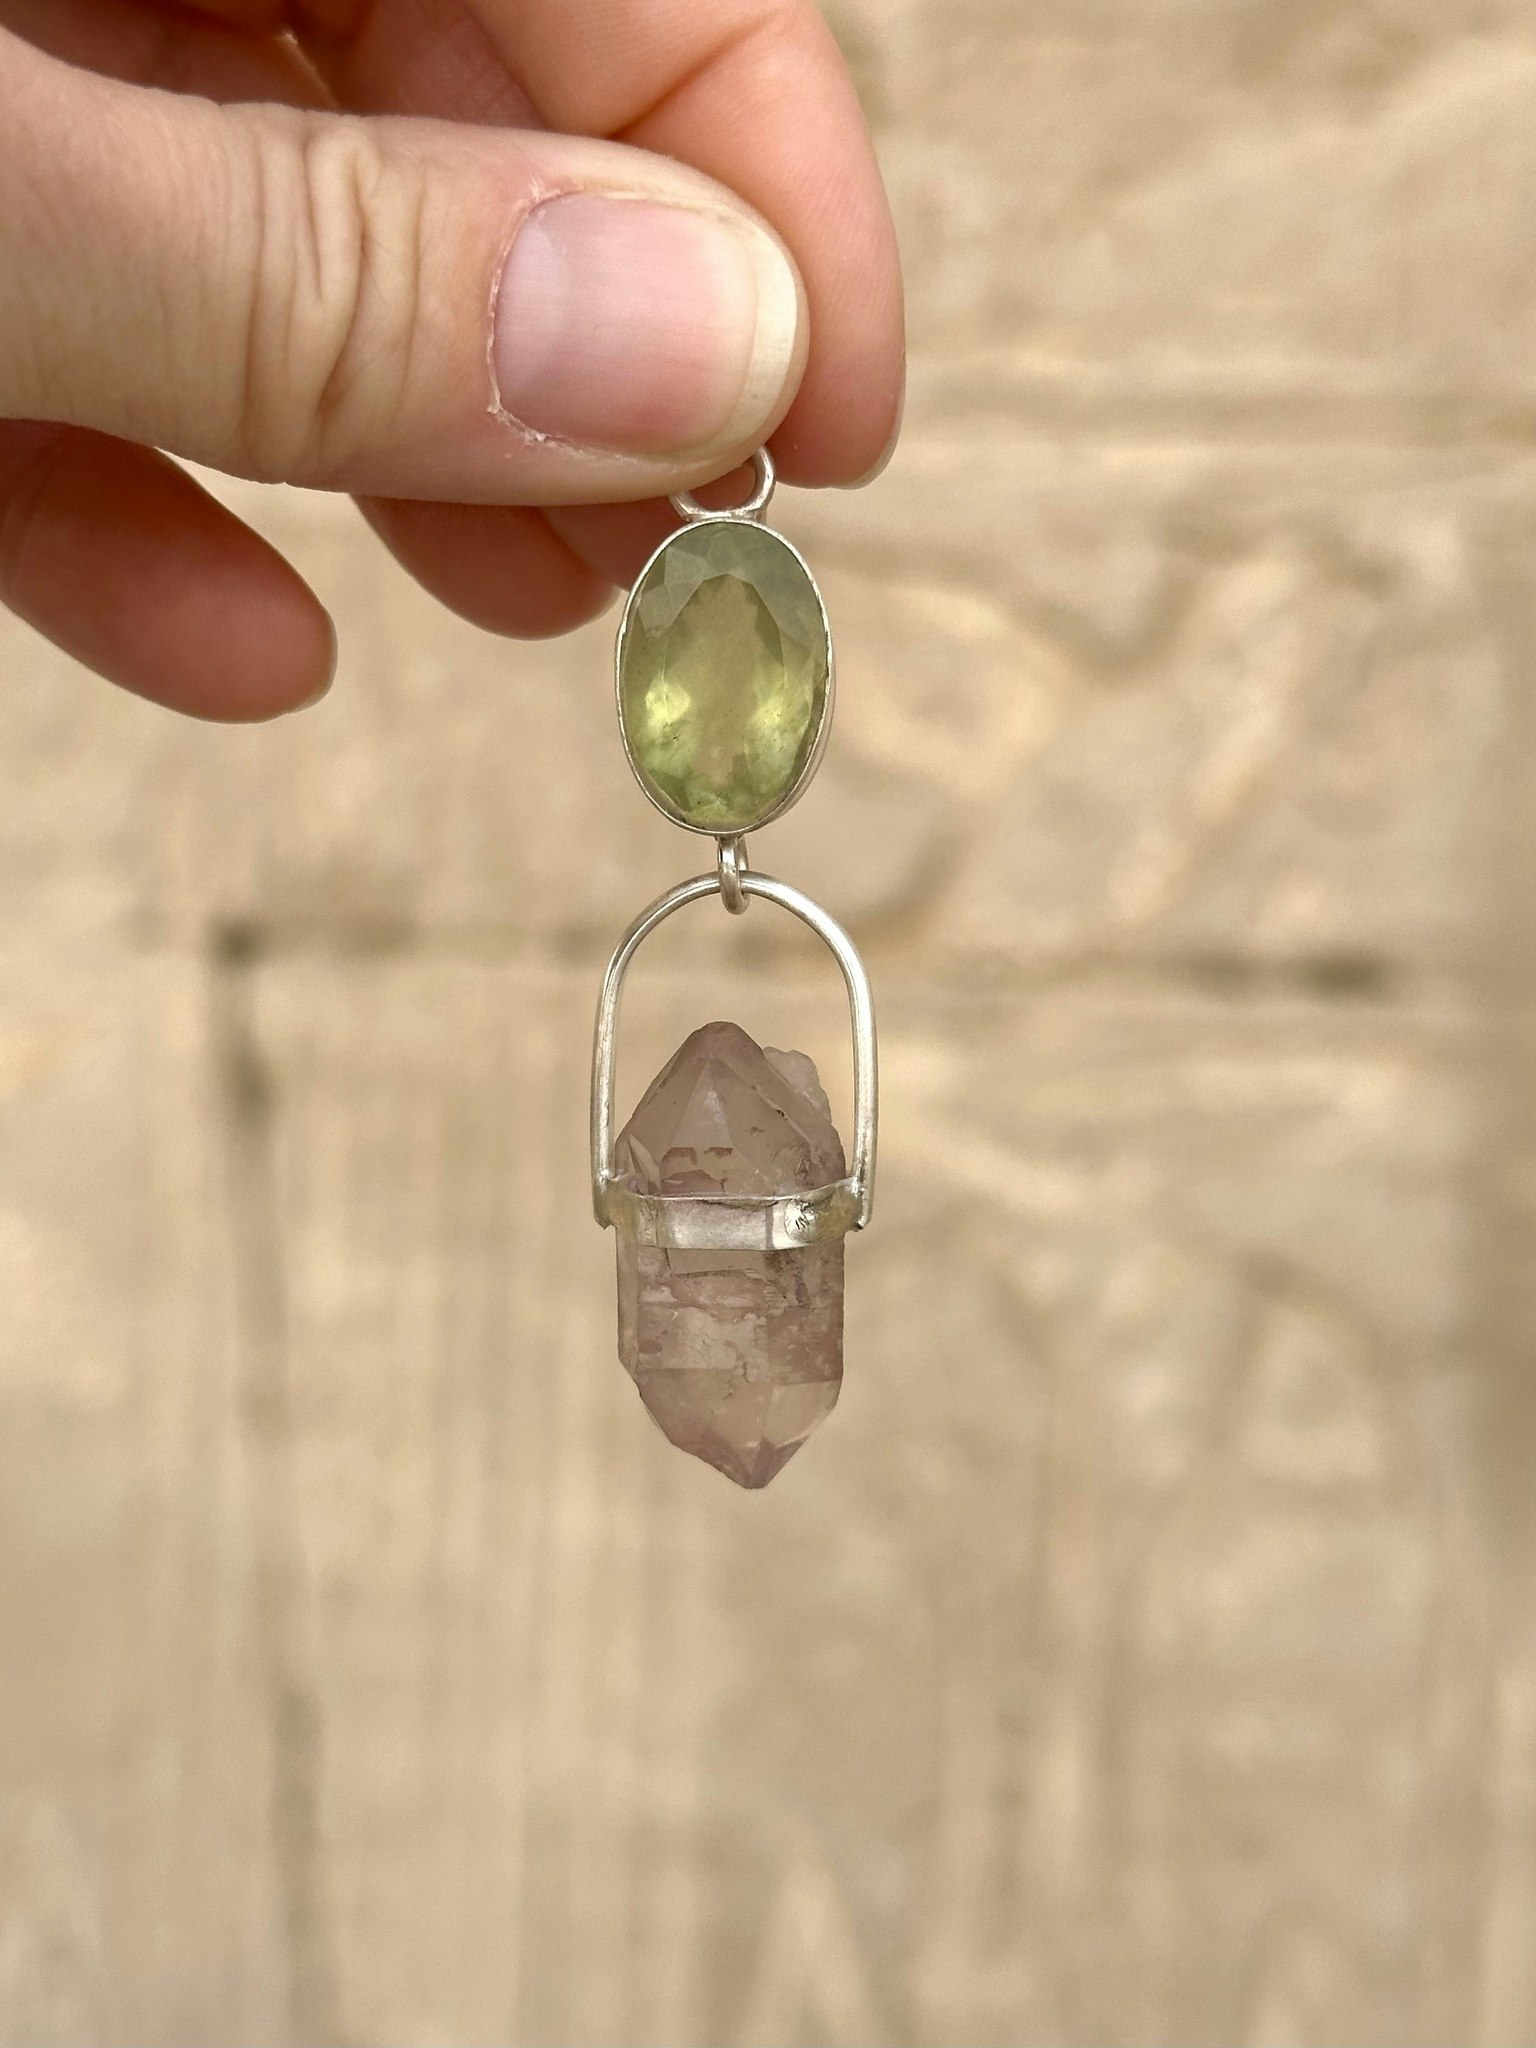 Golden beeyll with double terminated pink lemurian